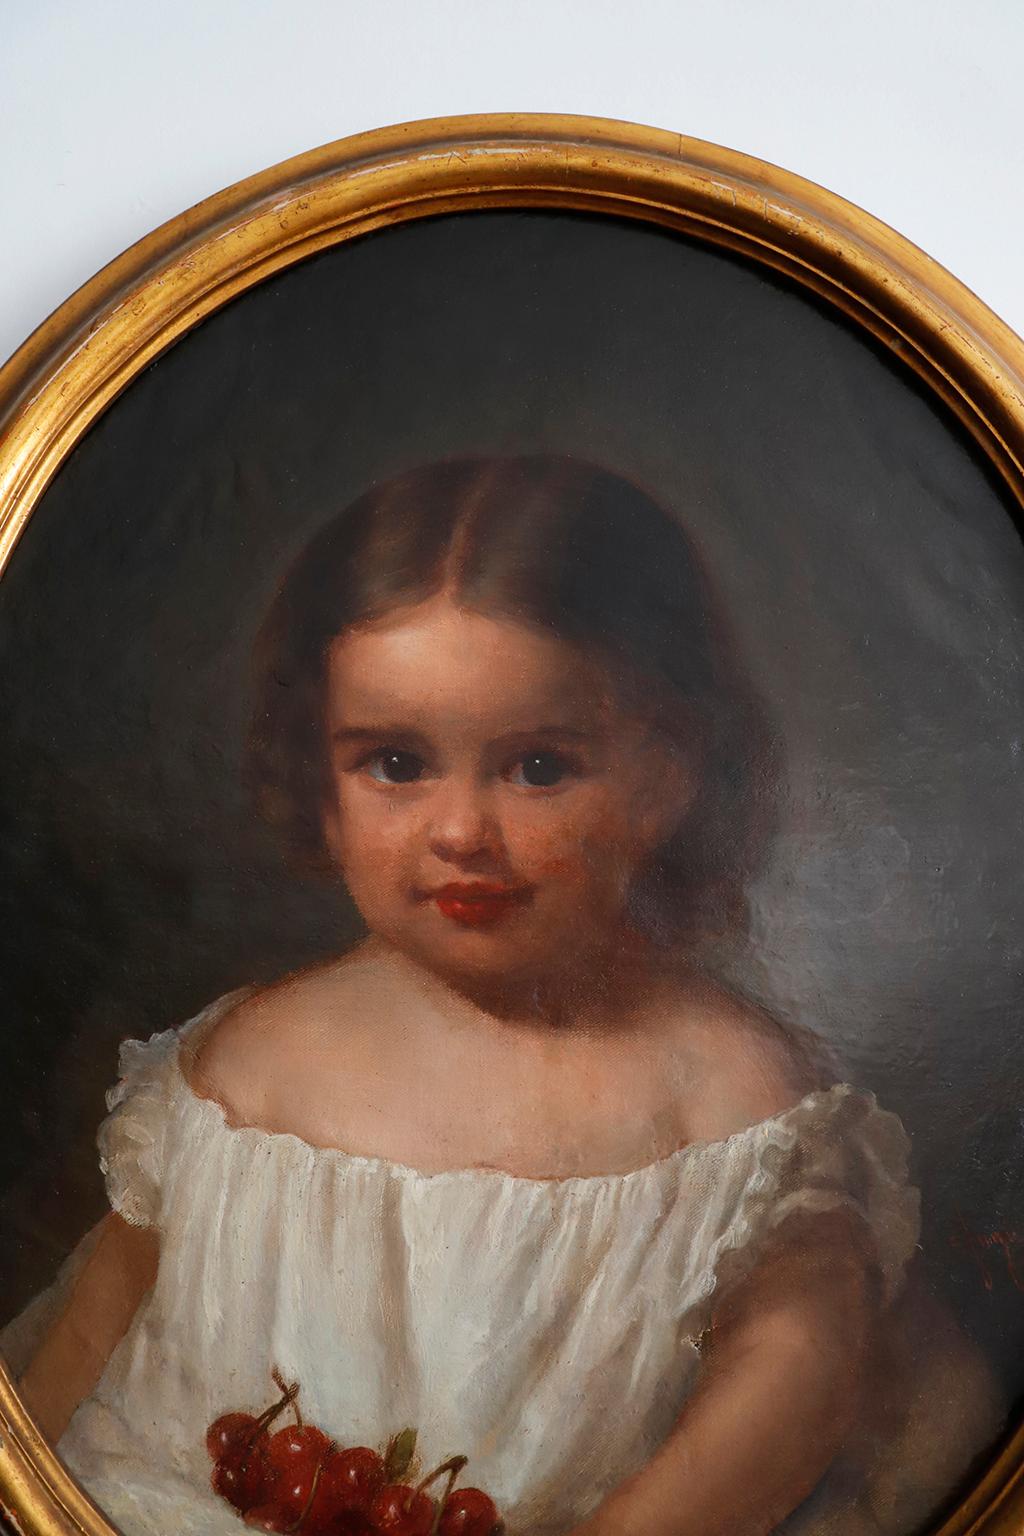 Signed and dated 1873. We offer this 19th century oil on canvas portrait of little girl with cherries.